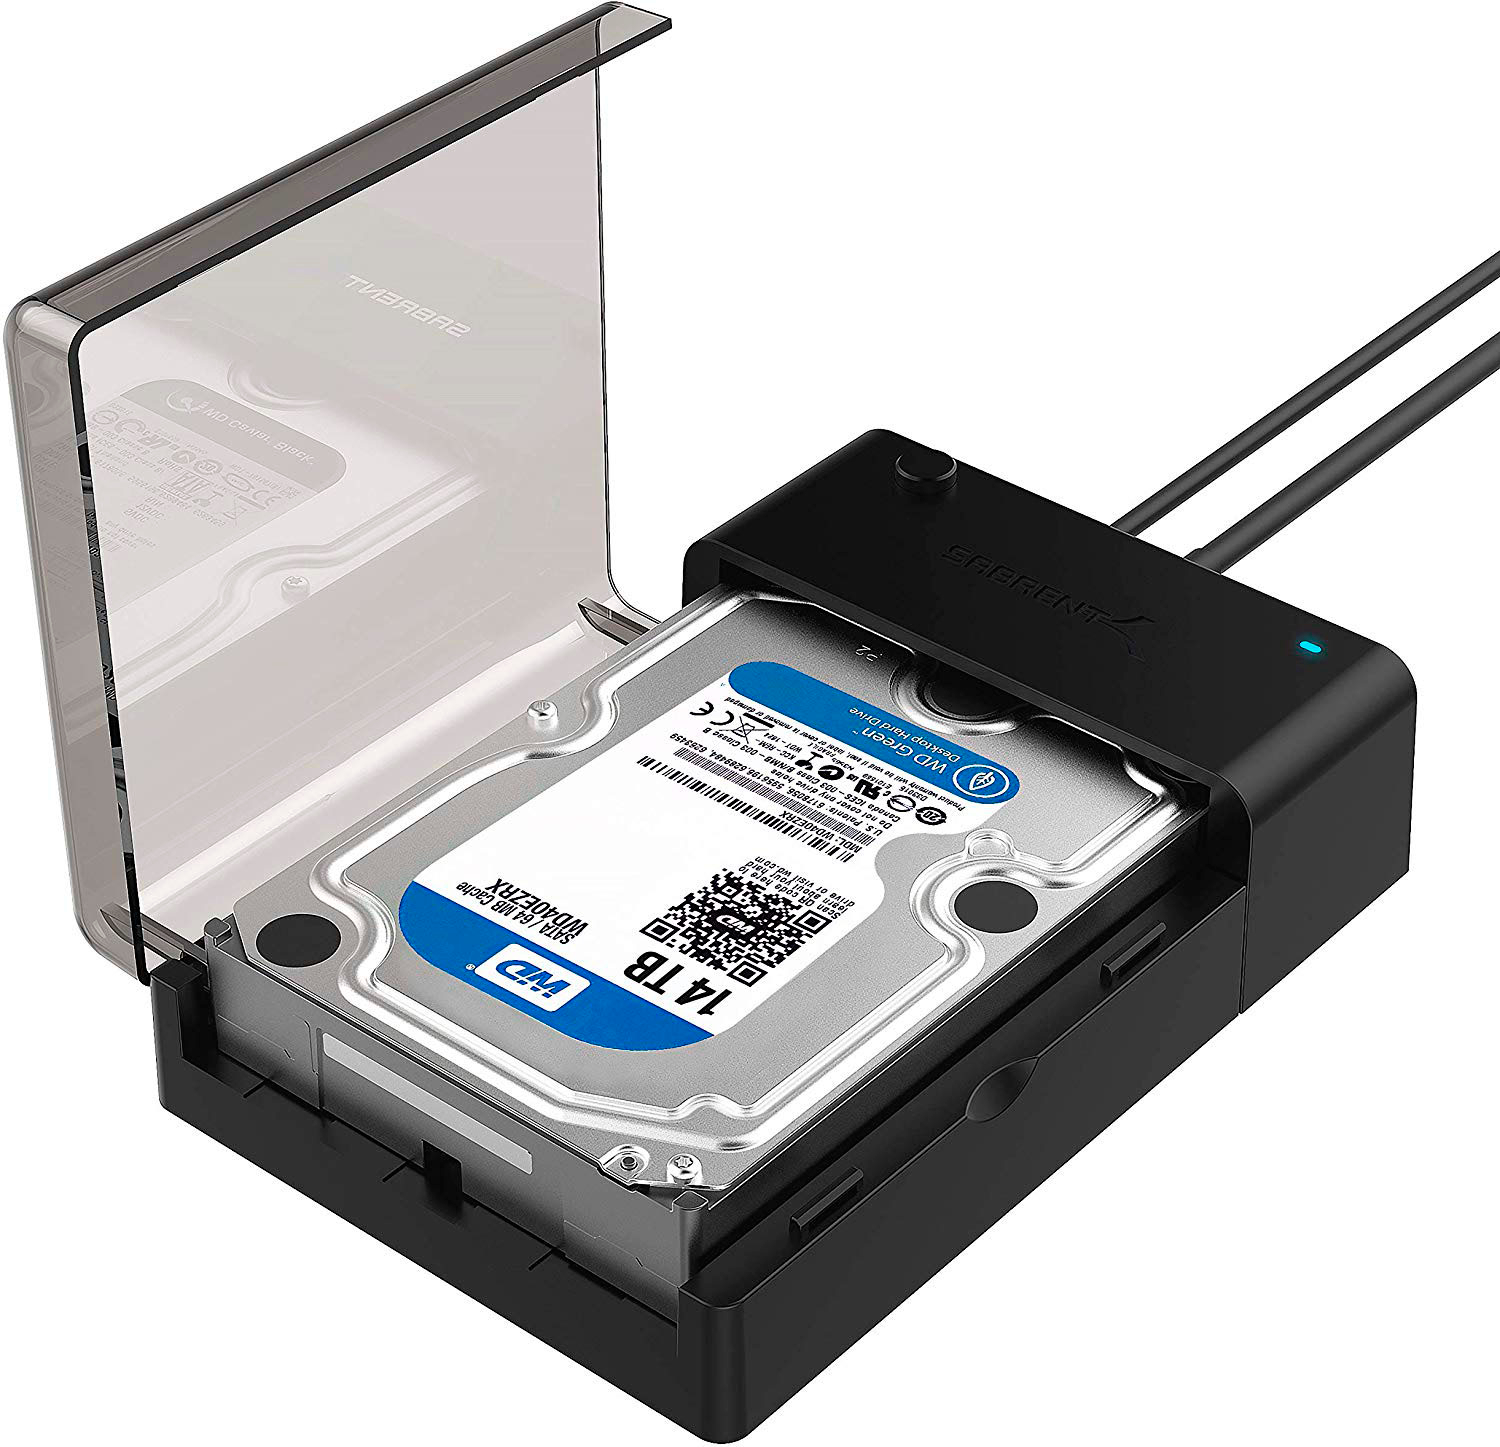 Will the sata intended for a cdrom drive support a standard 2.5